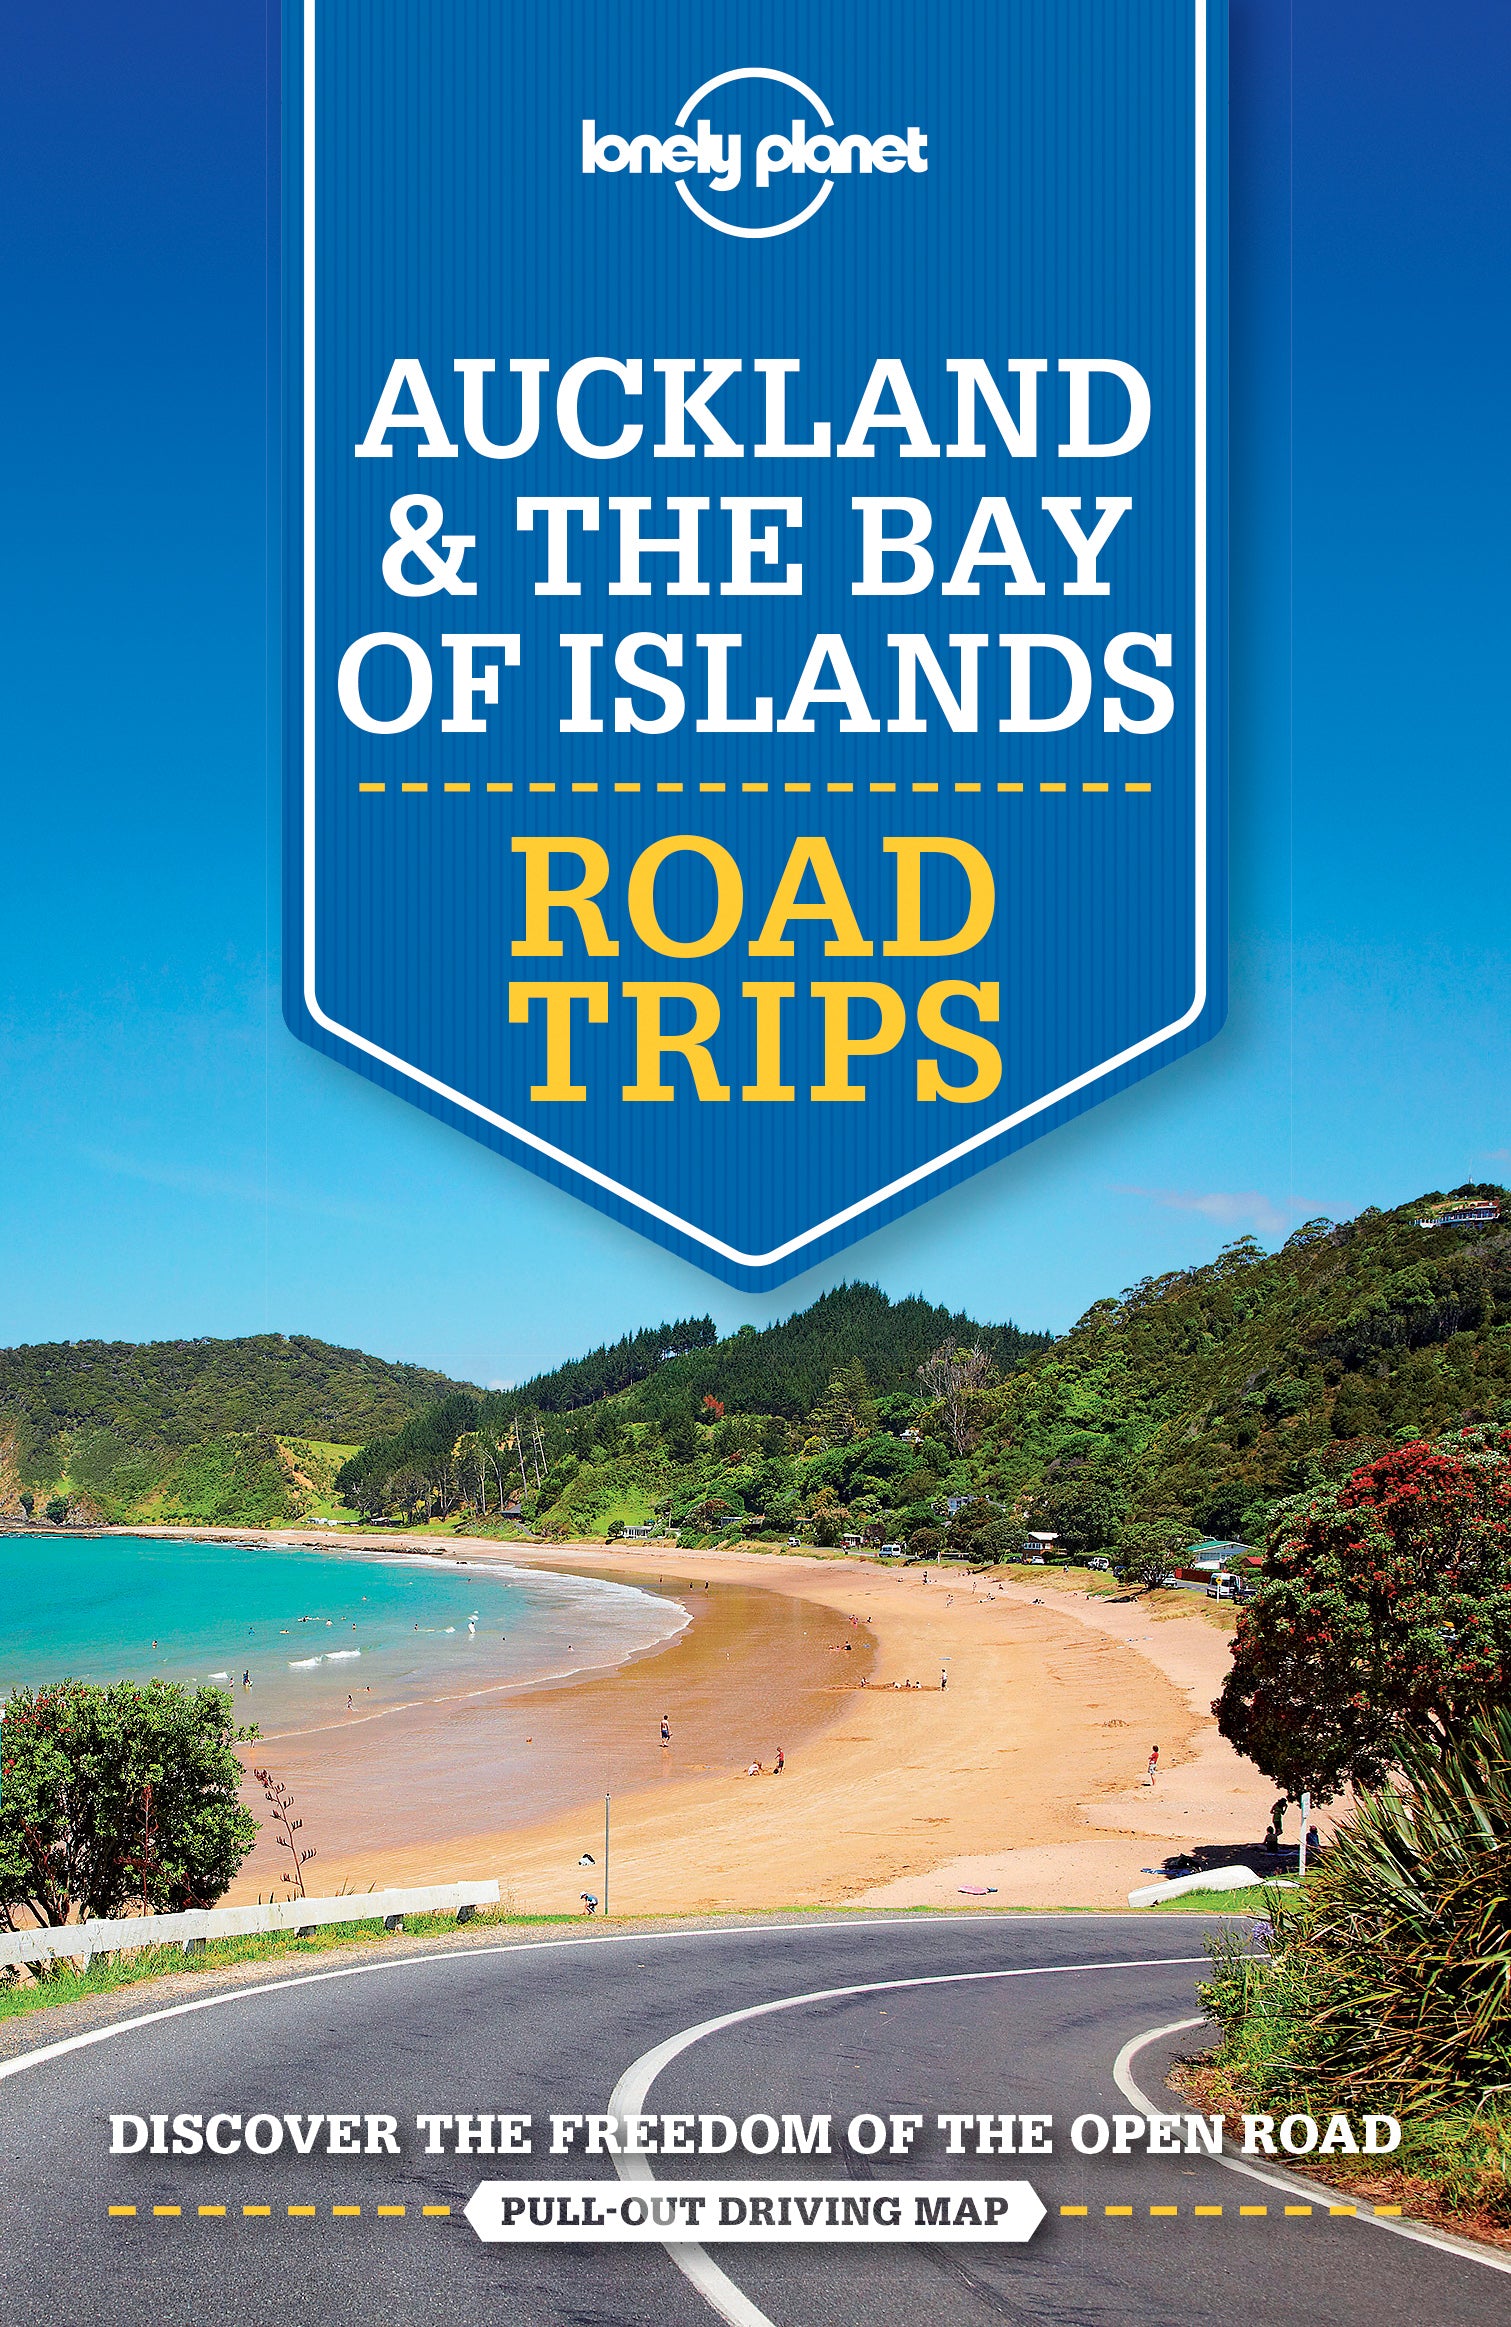 Auckland & The Bay of Islands Road Trips